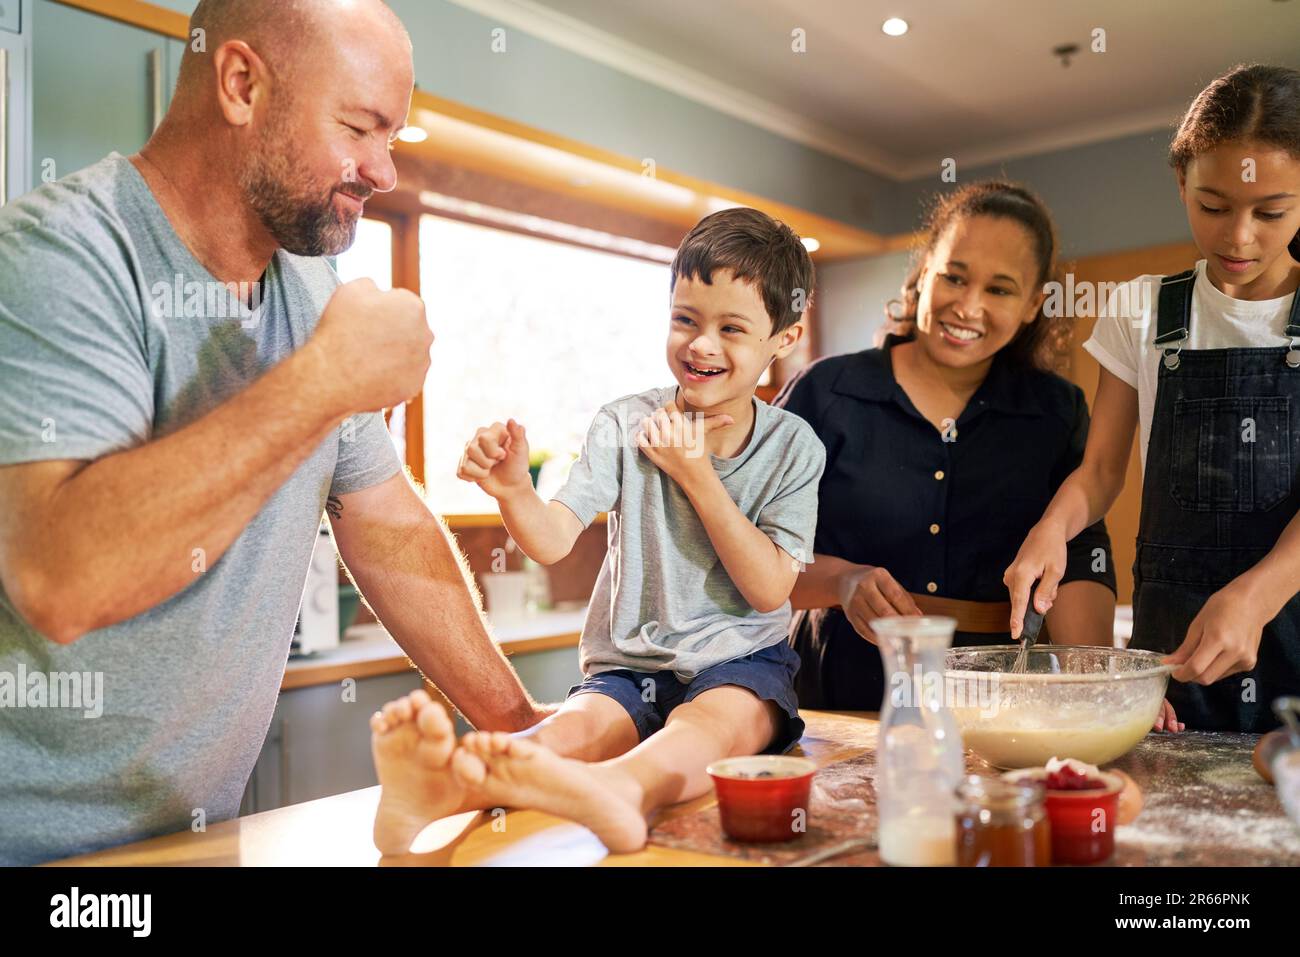 Happy boy with Down Syndrome fist bumping father in kitchen Stock Photo